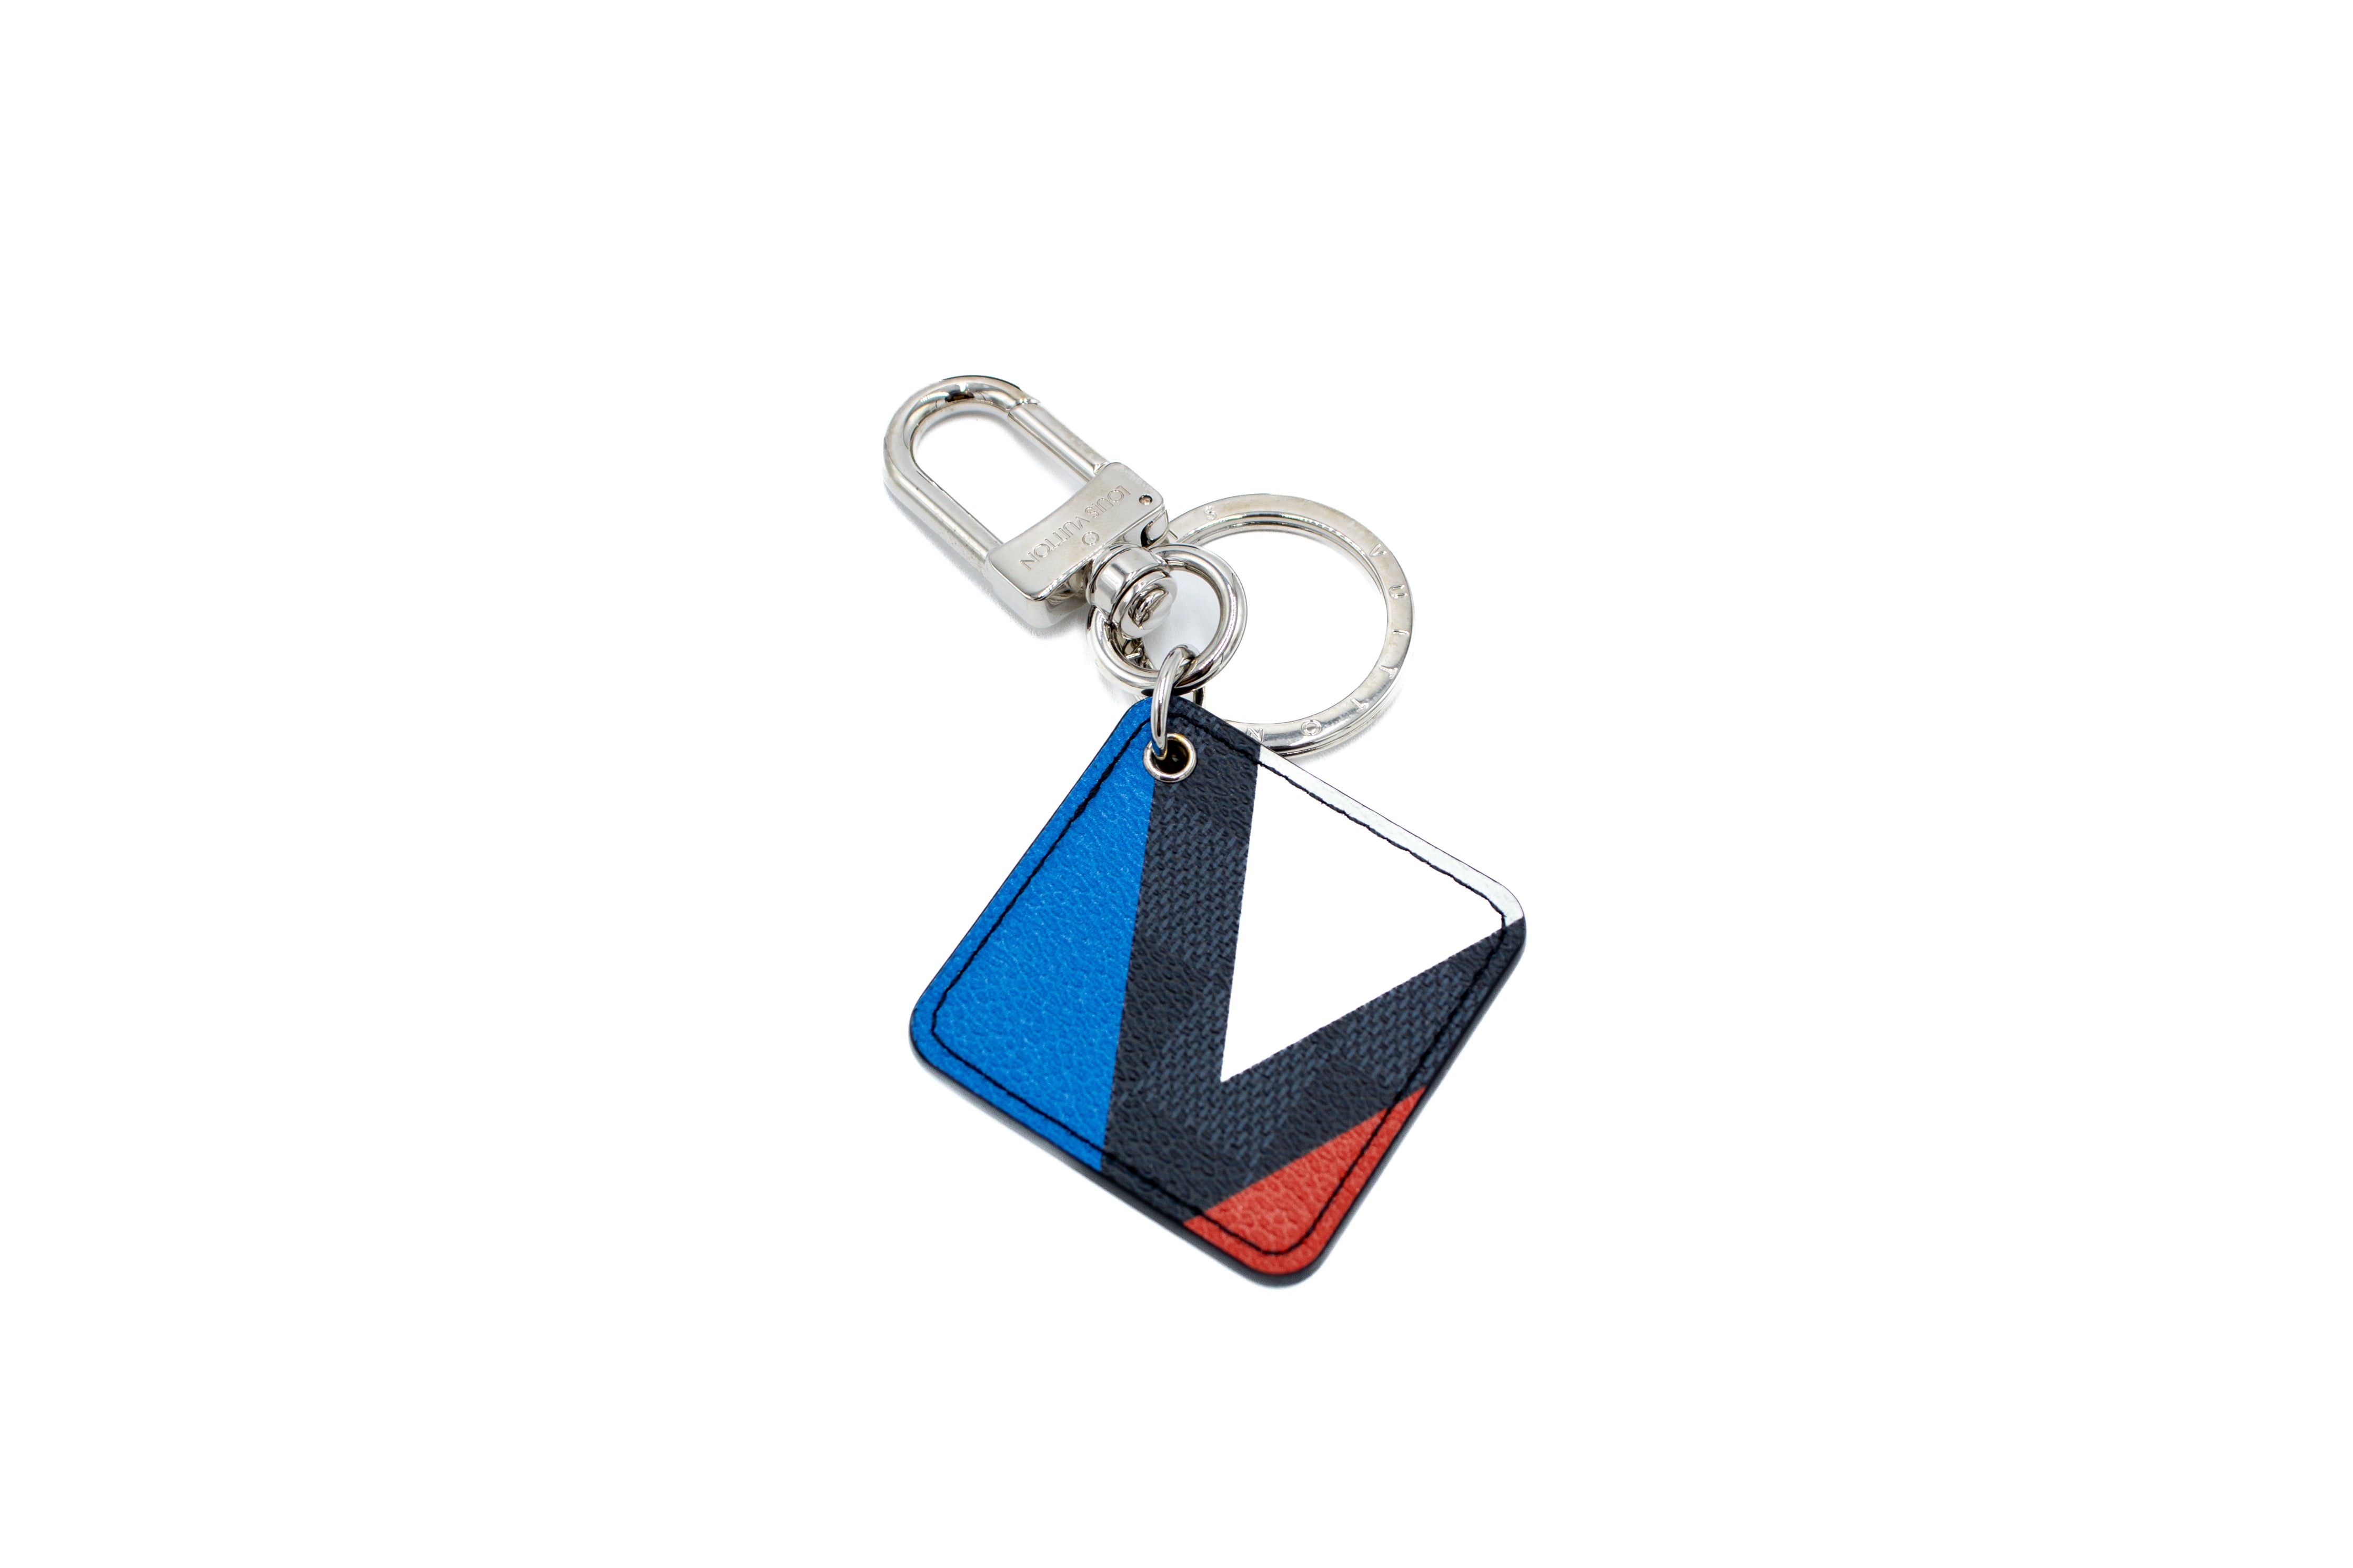 LOUIS VUITTON AMERICA'S CUP KEYCHAIN